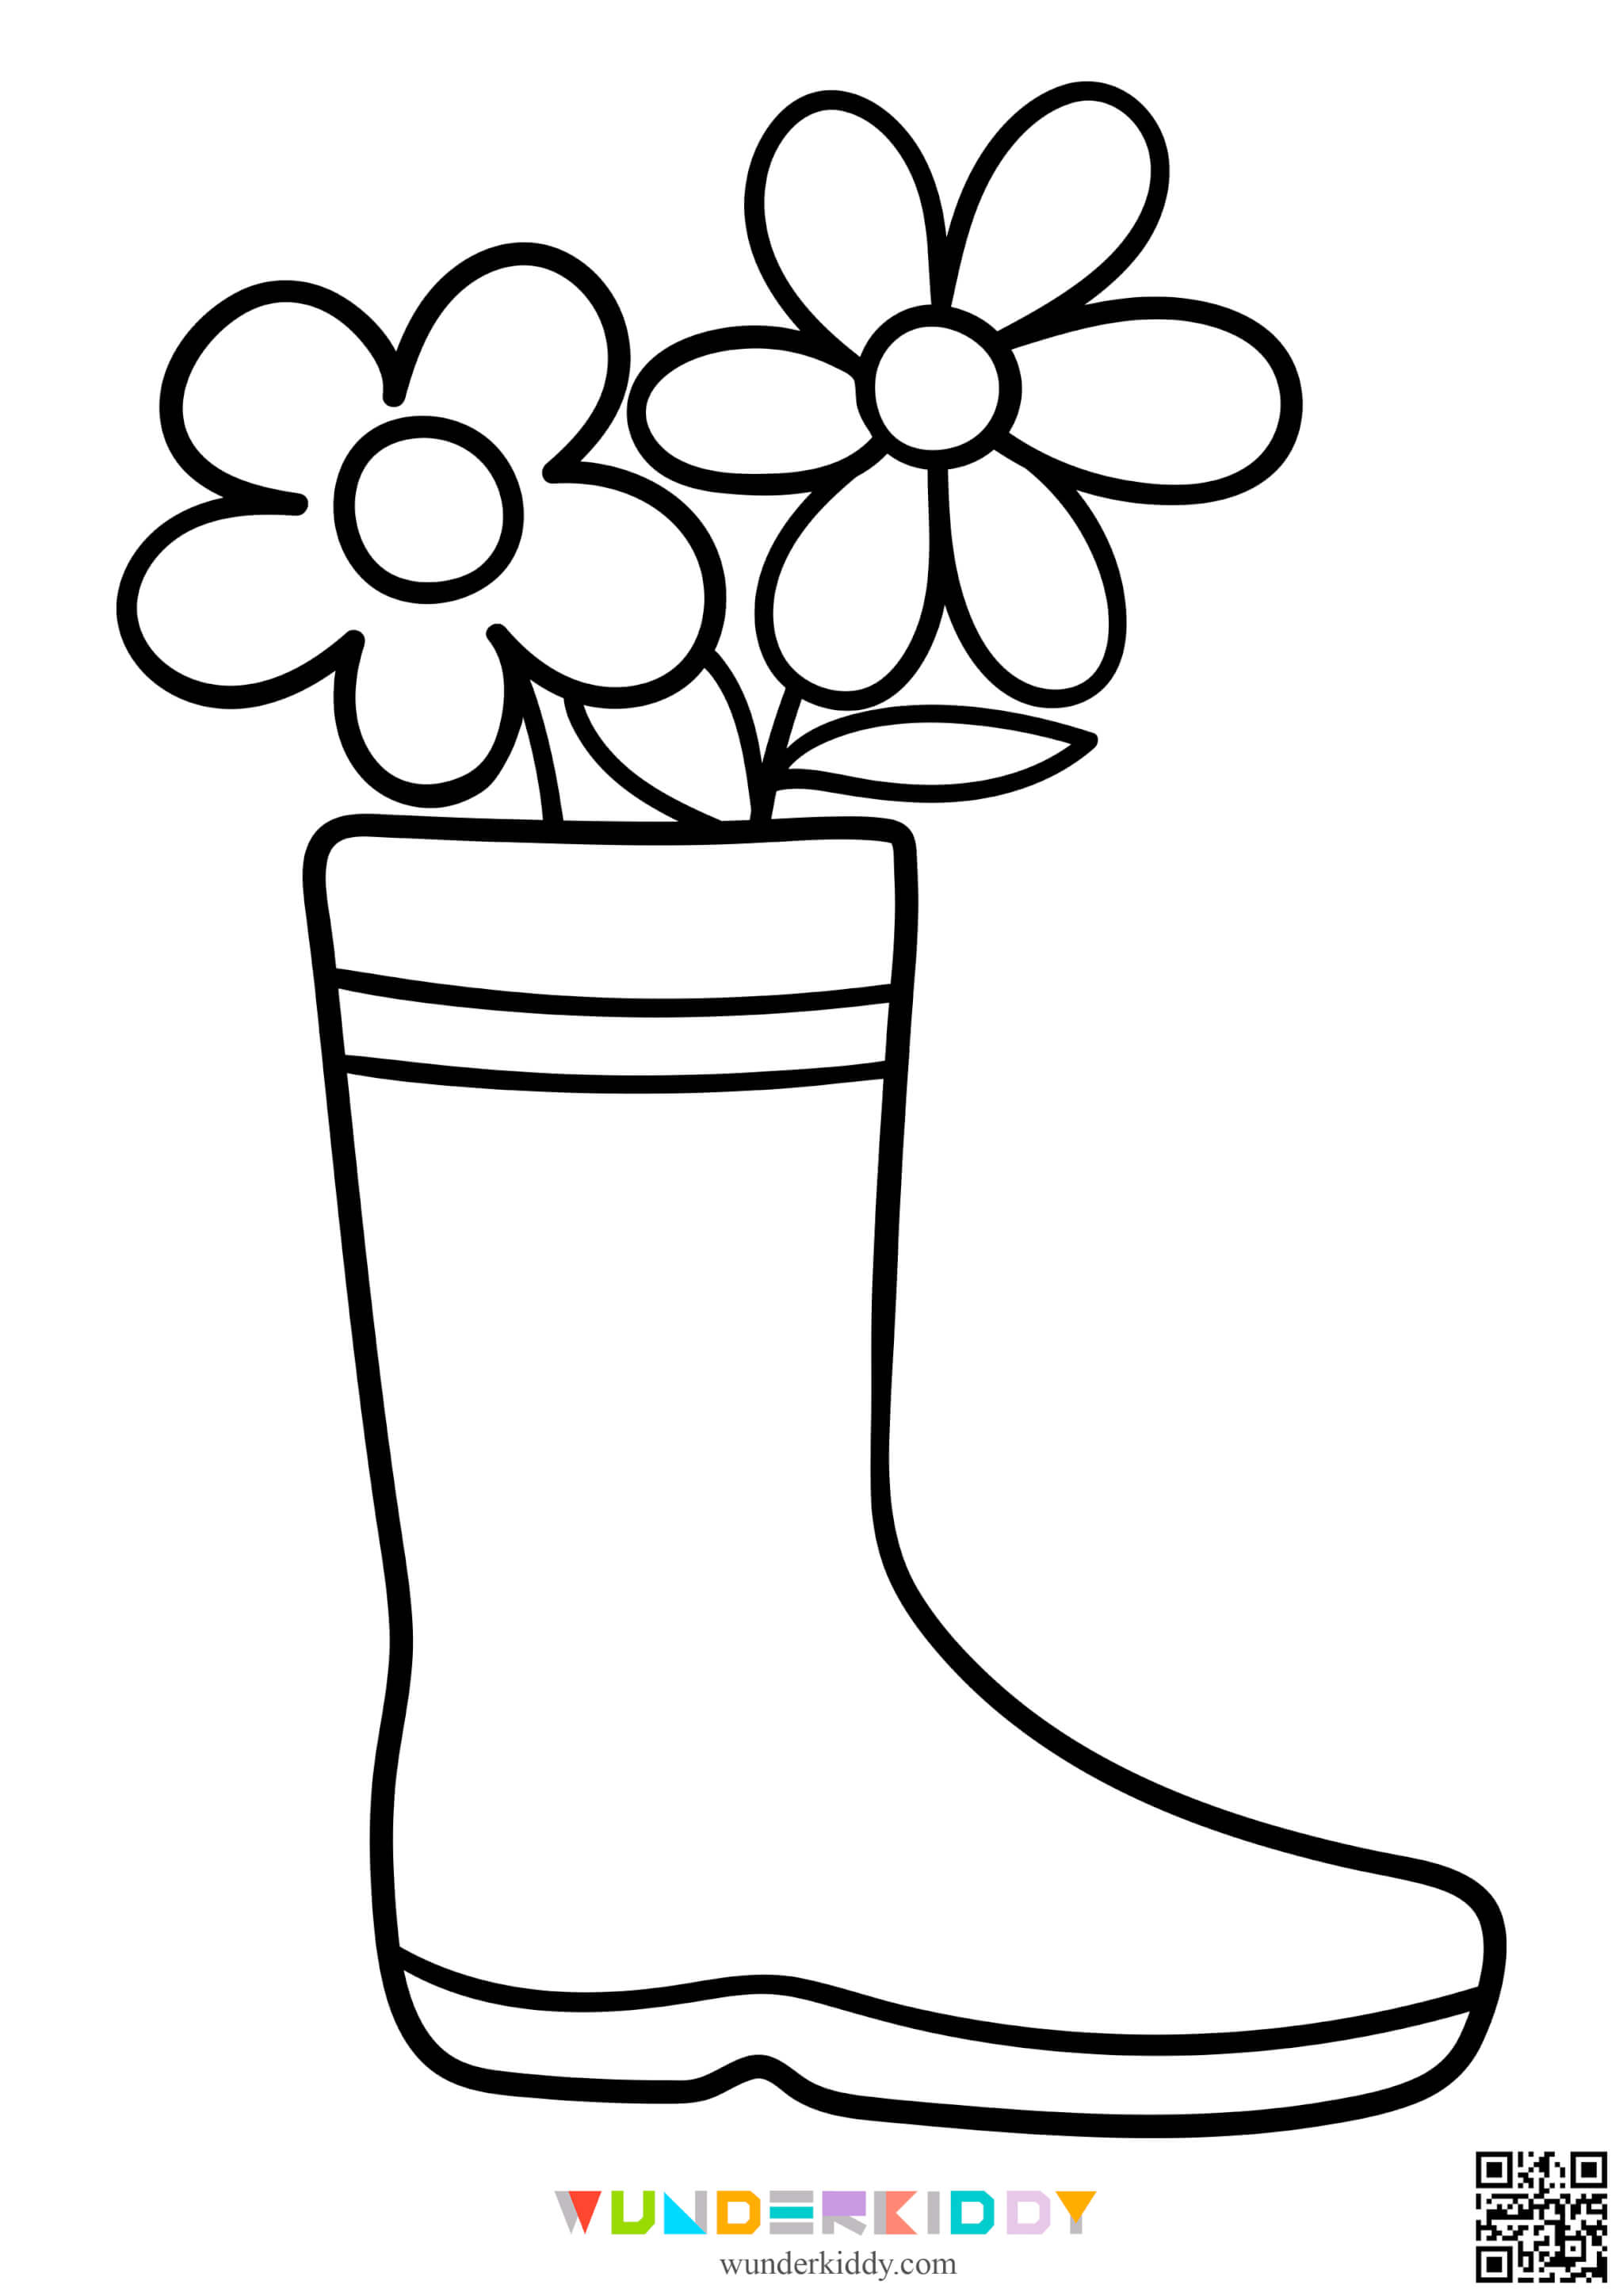 Spring Coloring Pages - Image 3